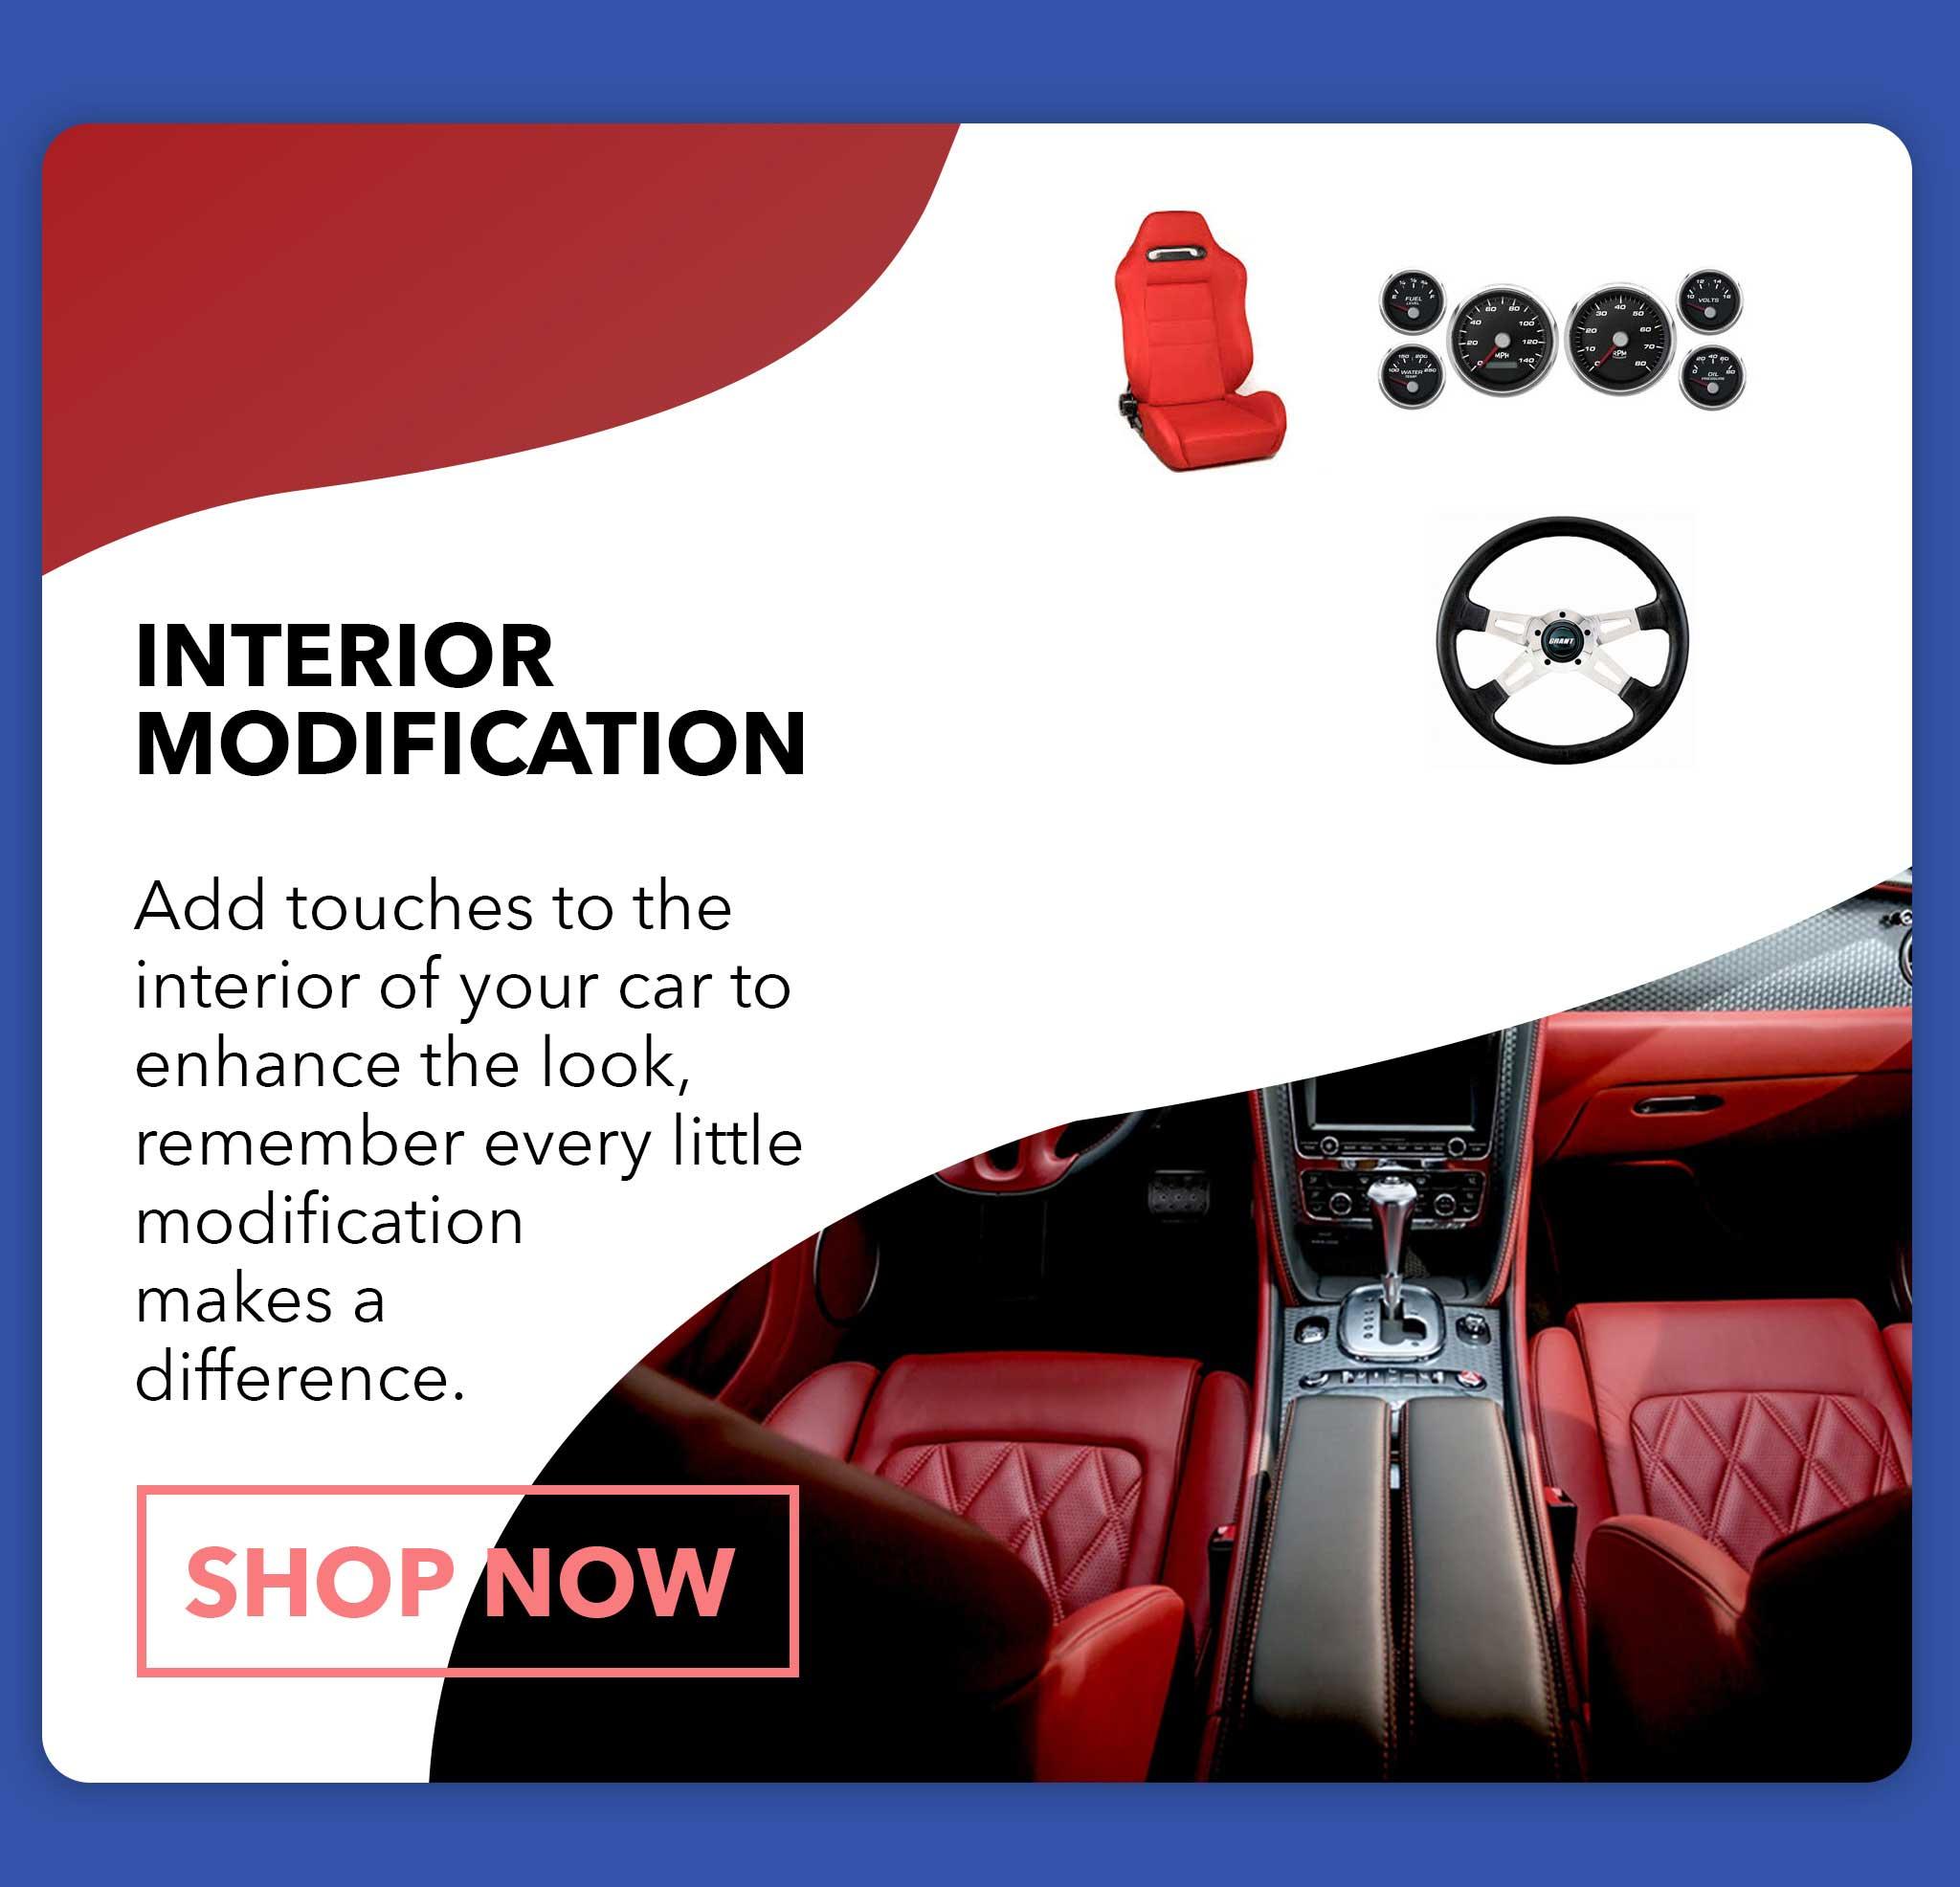 Add touches to the Interior of your car to enhance the look, remember every little modification makes a difference.